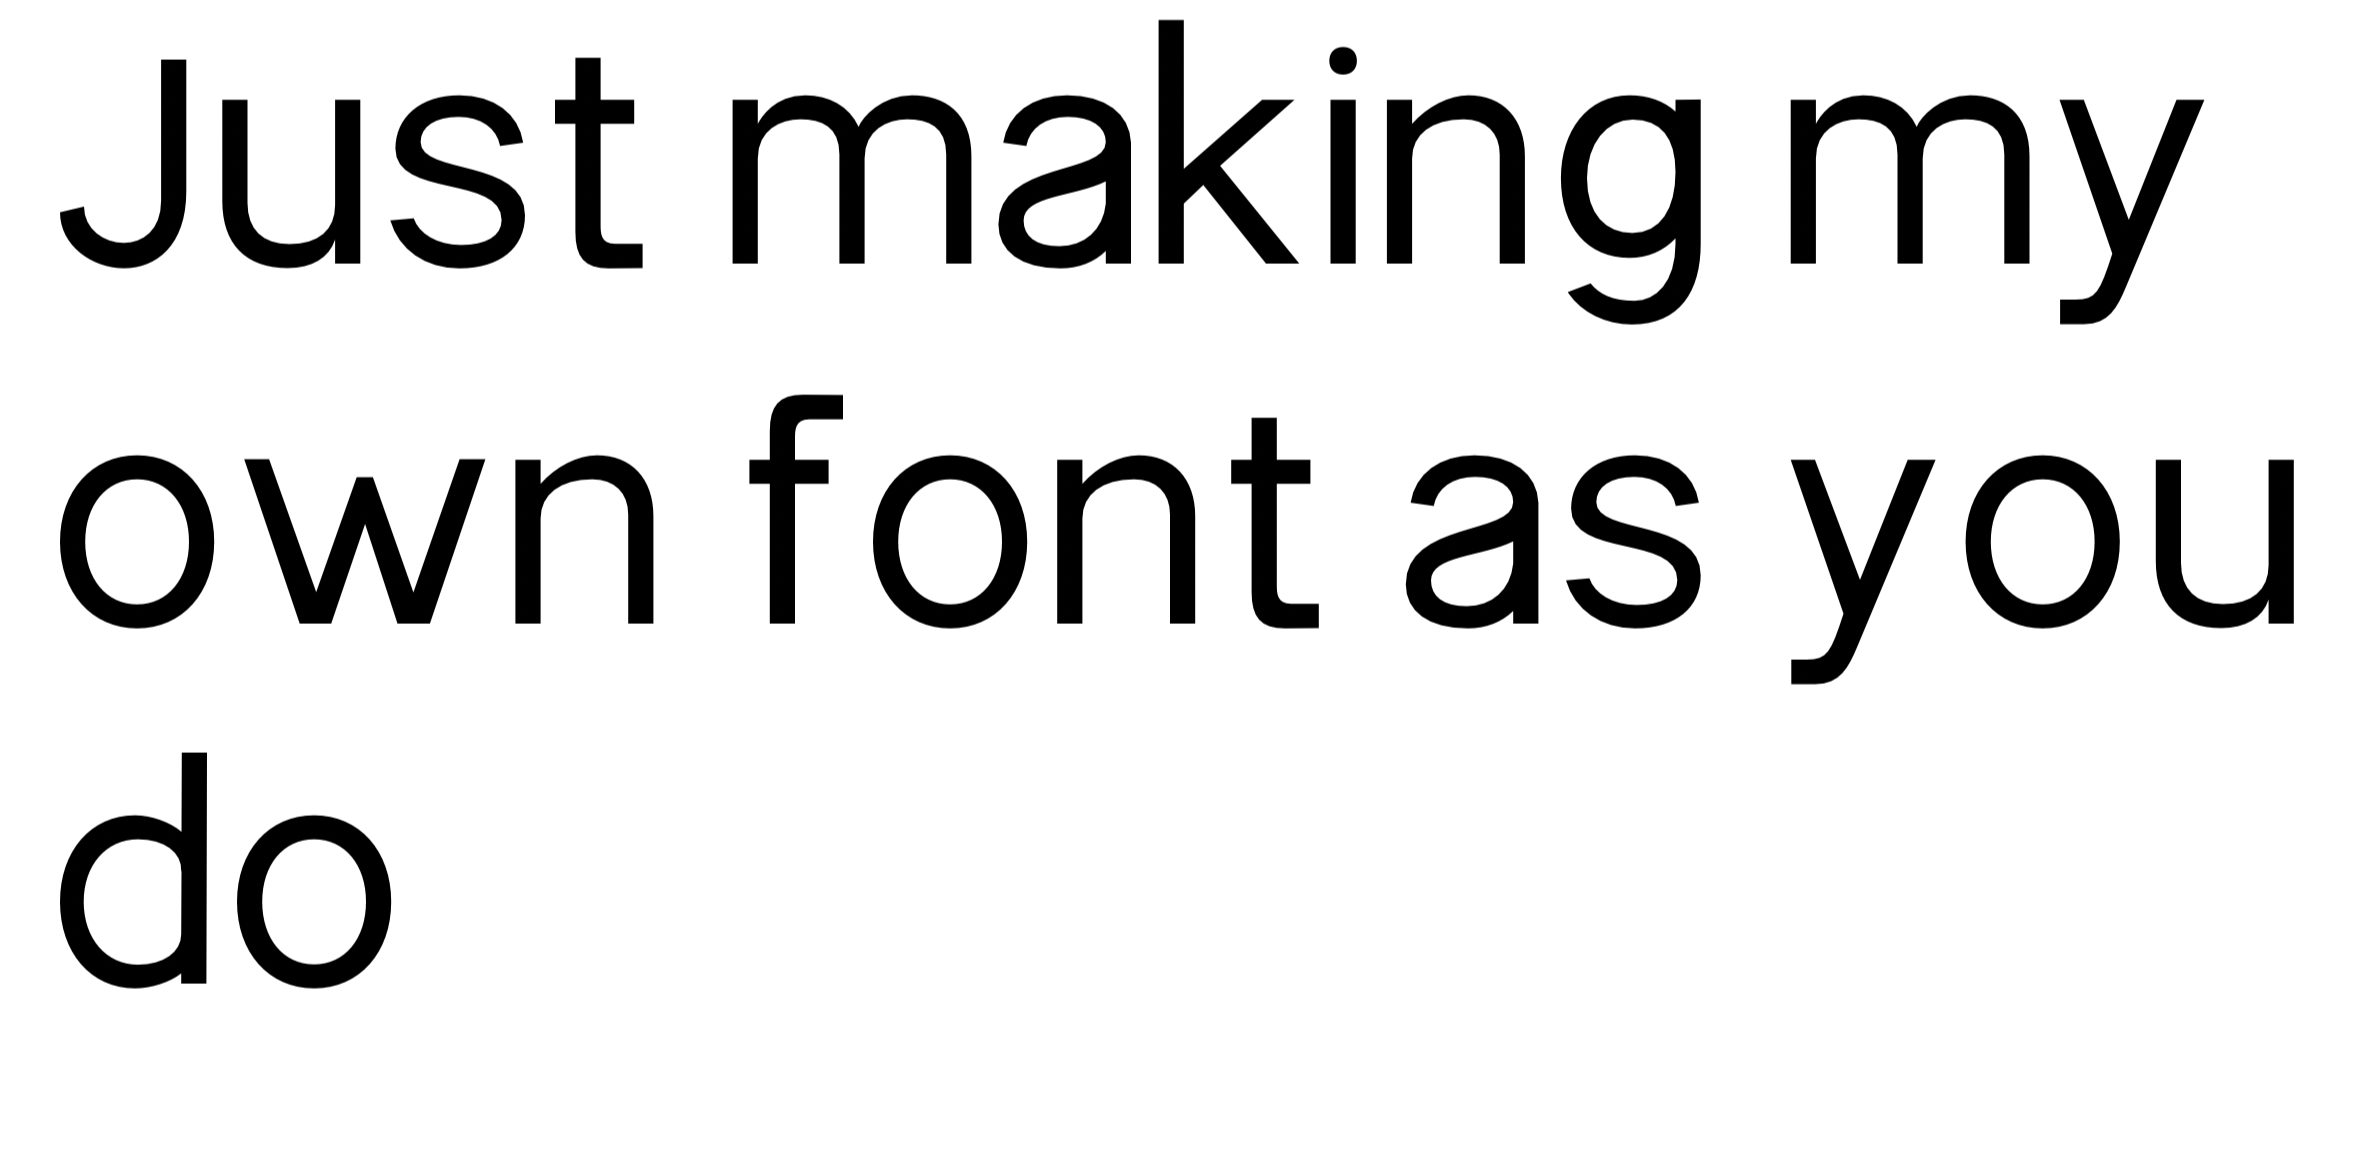 A further update to the font